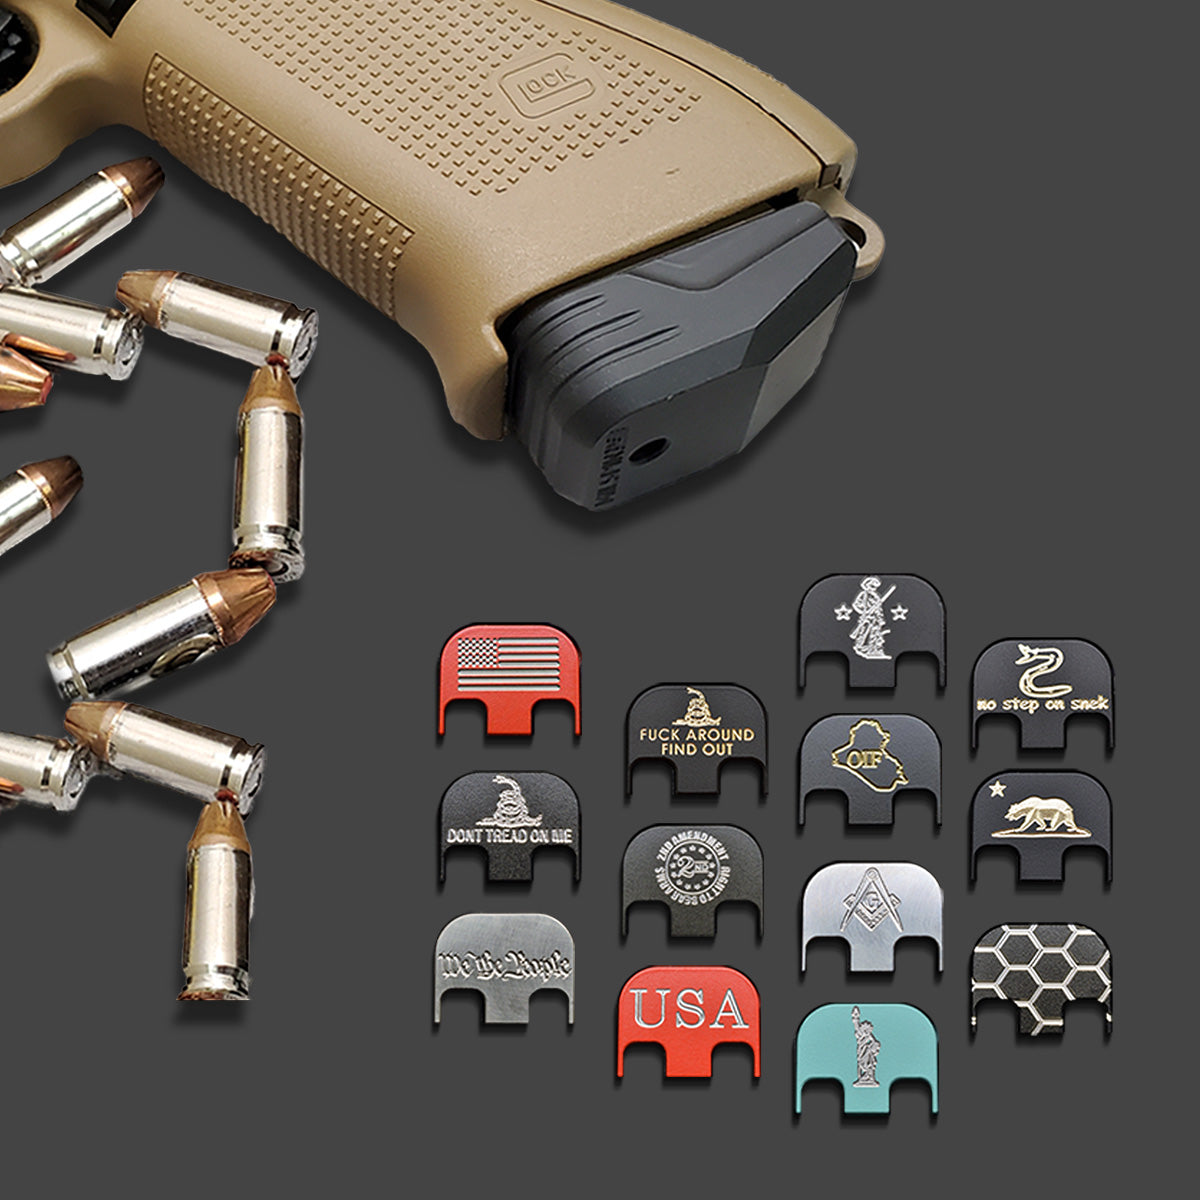 Milpsin offers over 200 engravings on their Glock back plates and magazine plates